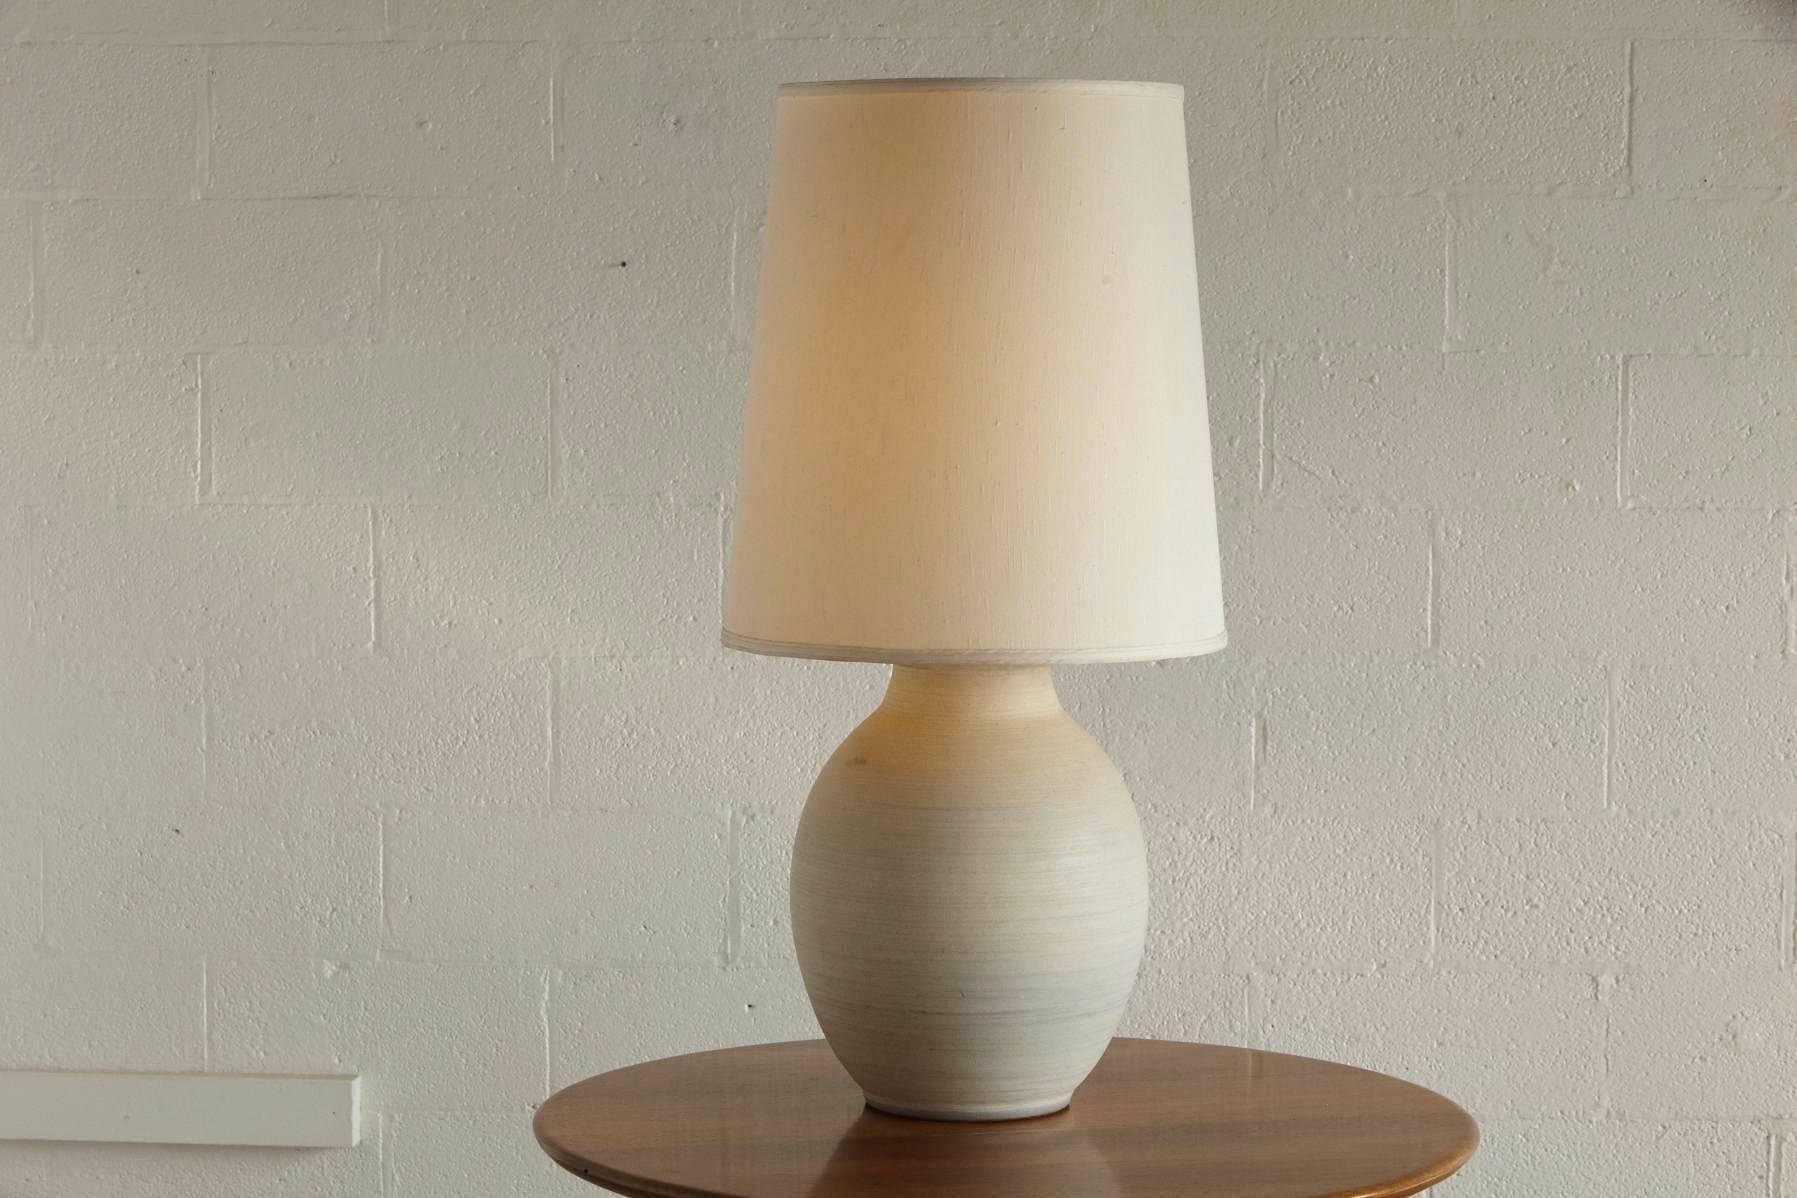 Large Italian cream colored ceramic lamp with tall silk shade.
Nice tall table lamp in very good condition from the 1970s.
Dimensions:
Diameter base 13 in x height to socket 21 in - height to finial 39 in.
Diameter shade 18 in.